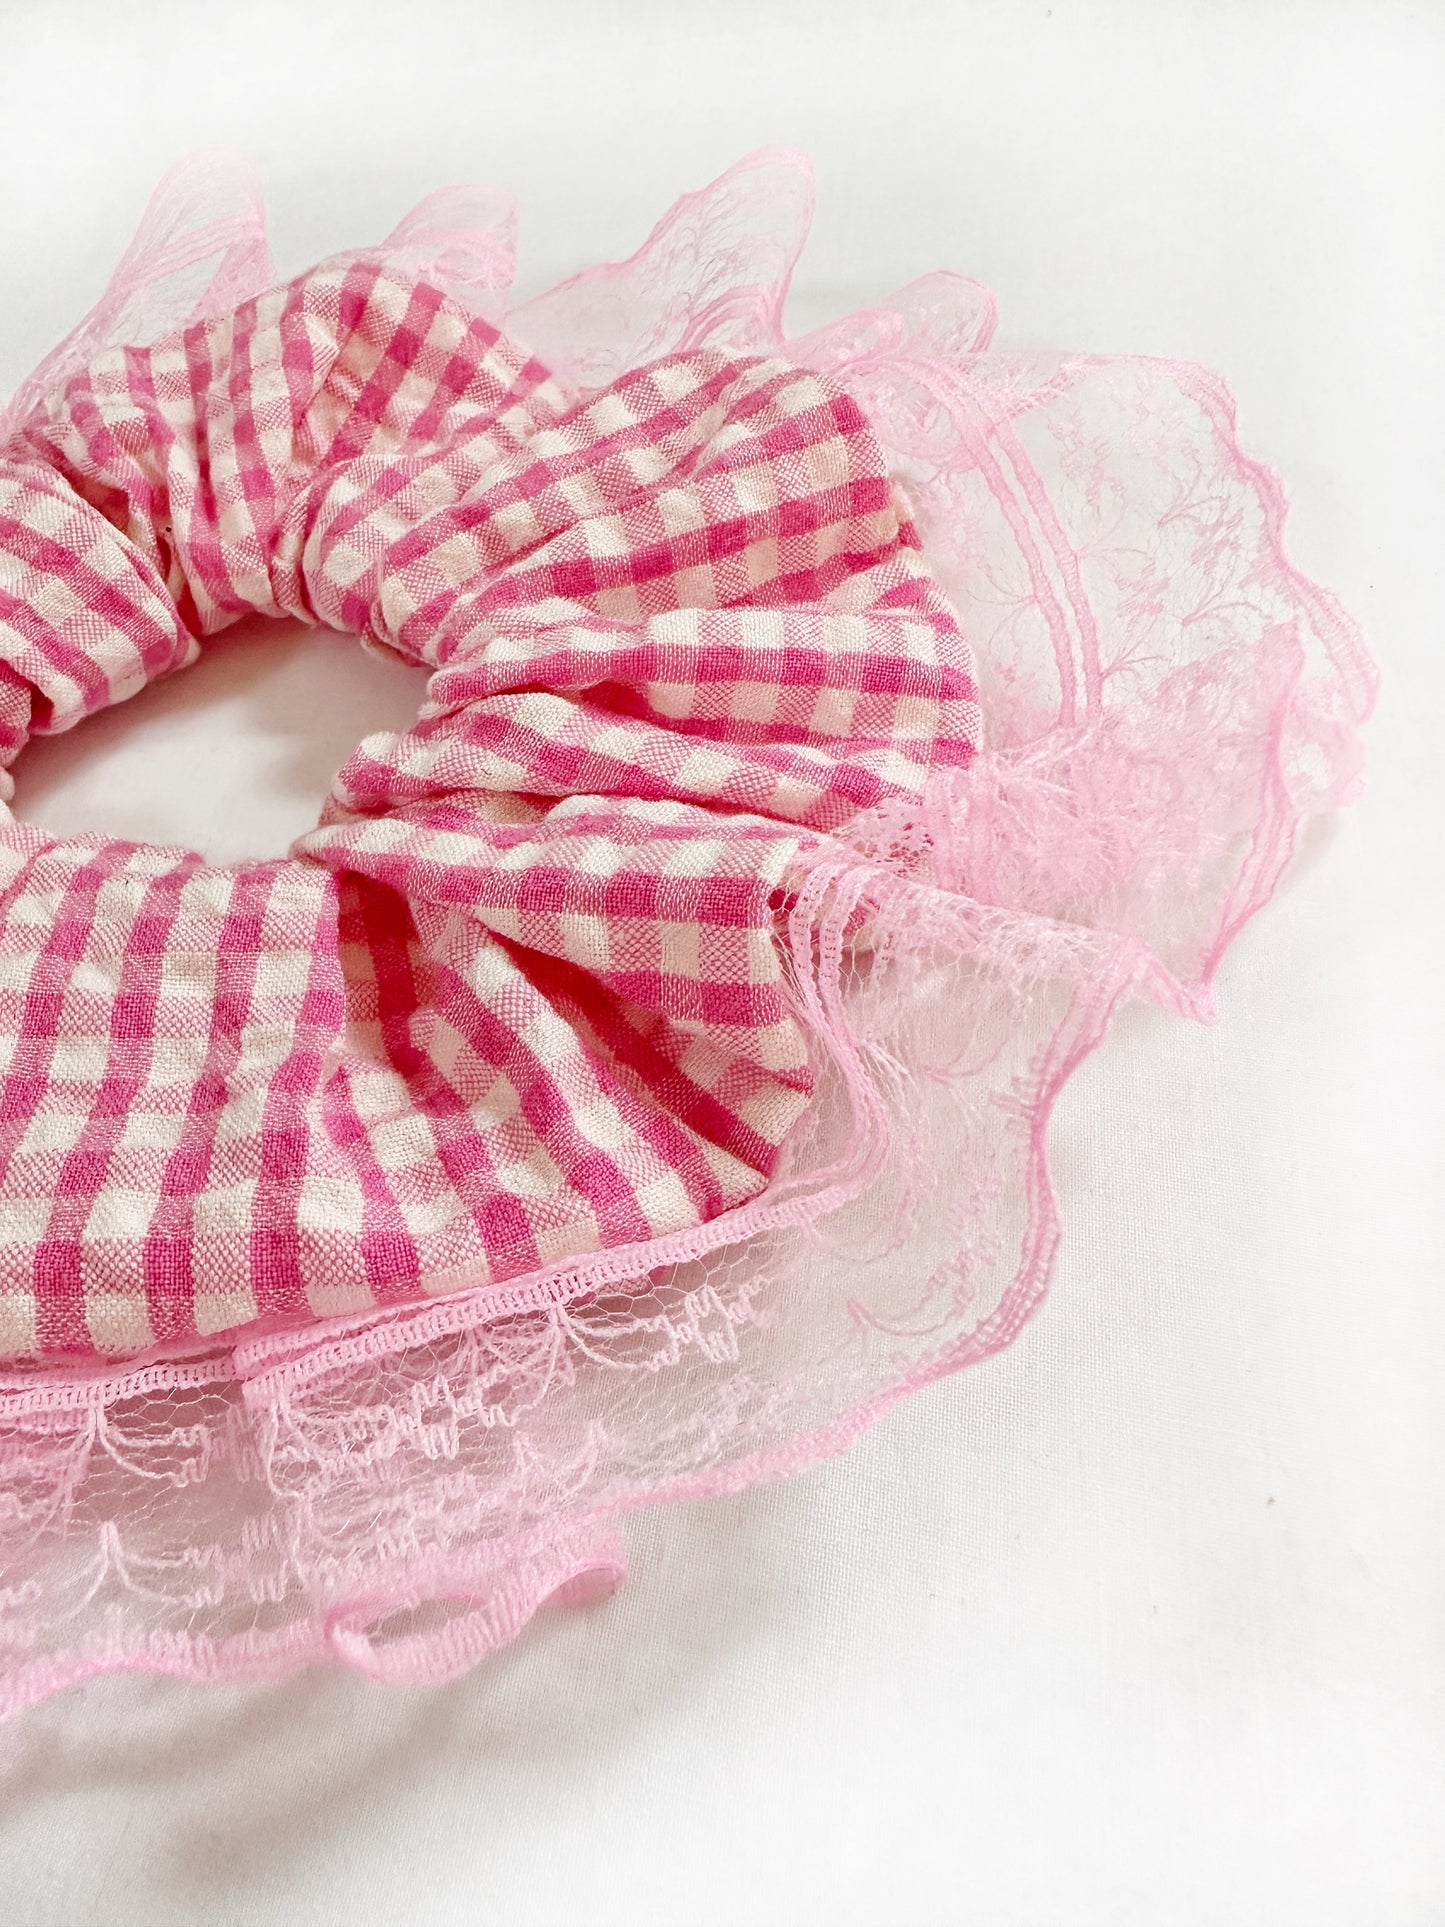 Oversized scrunchie in pink gingham